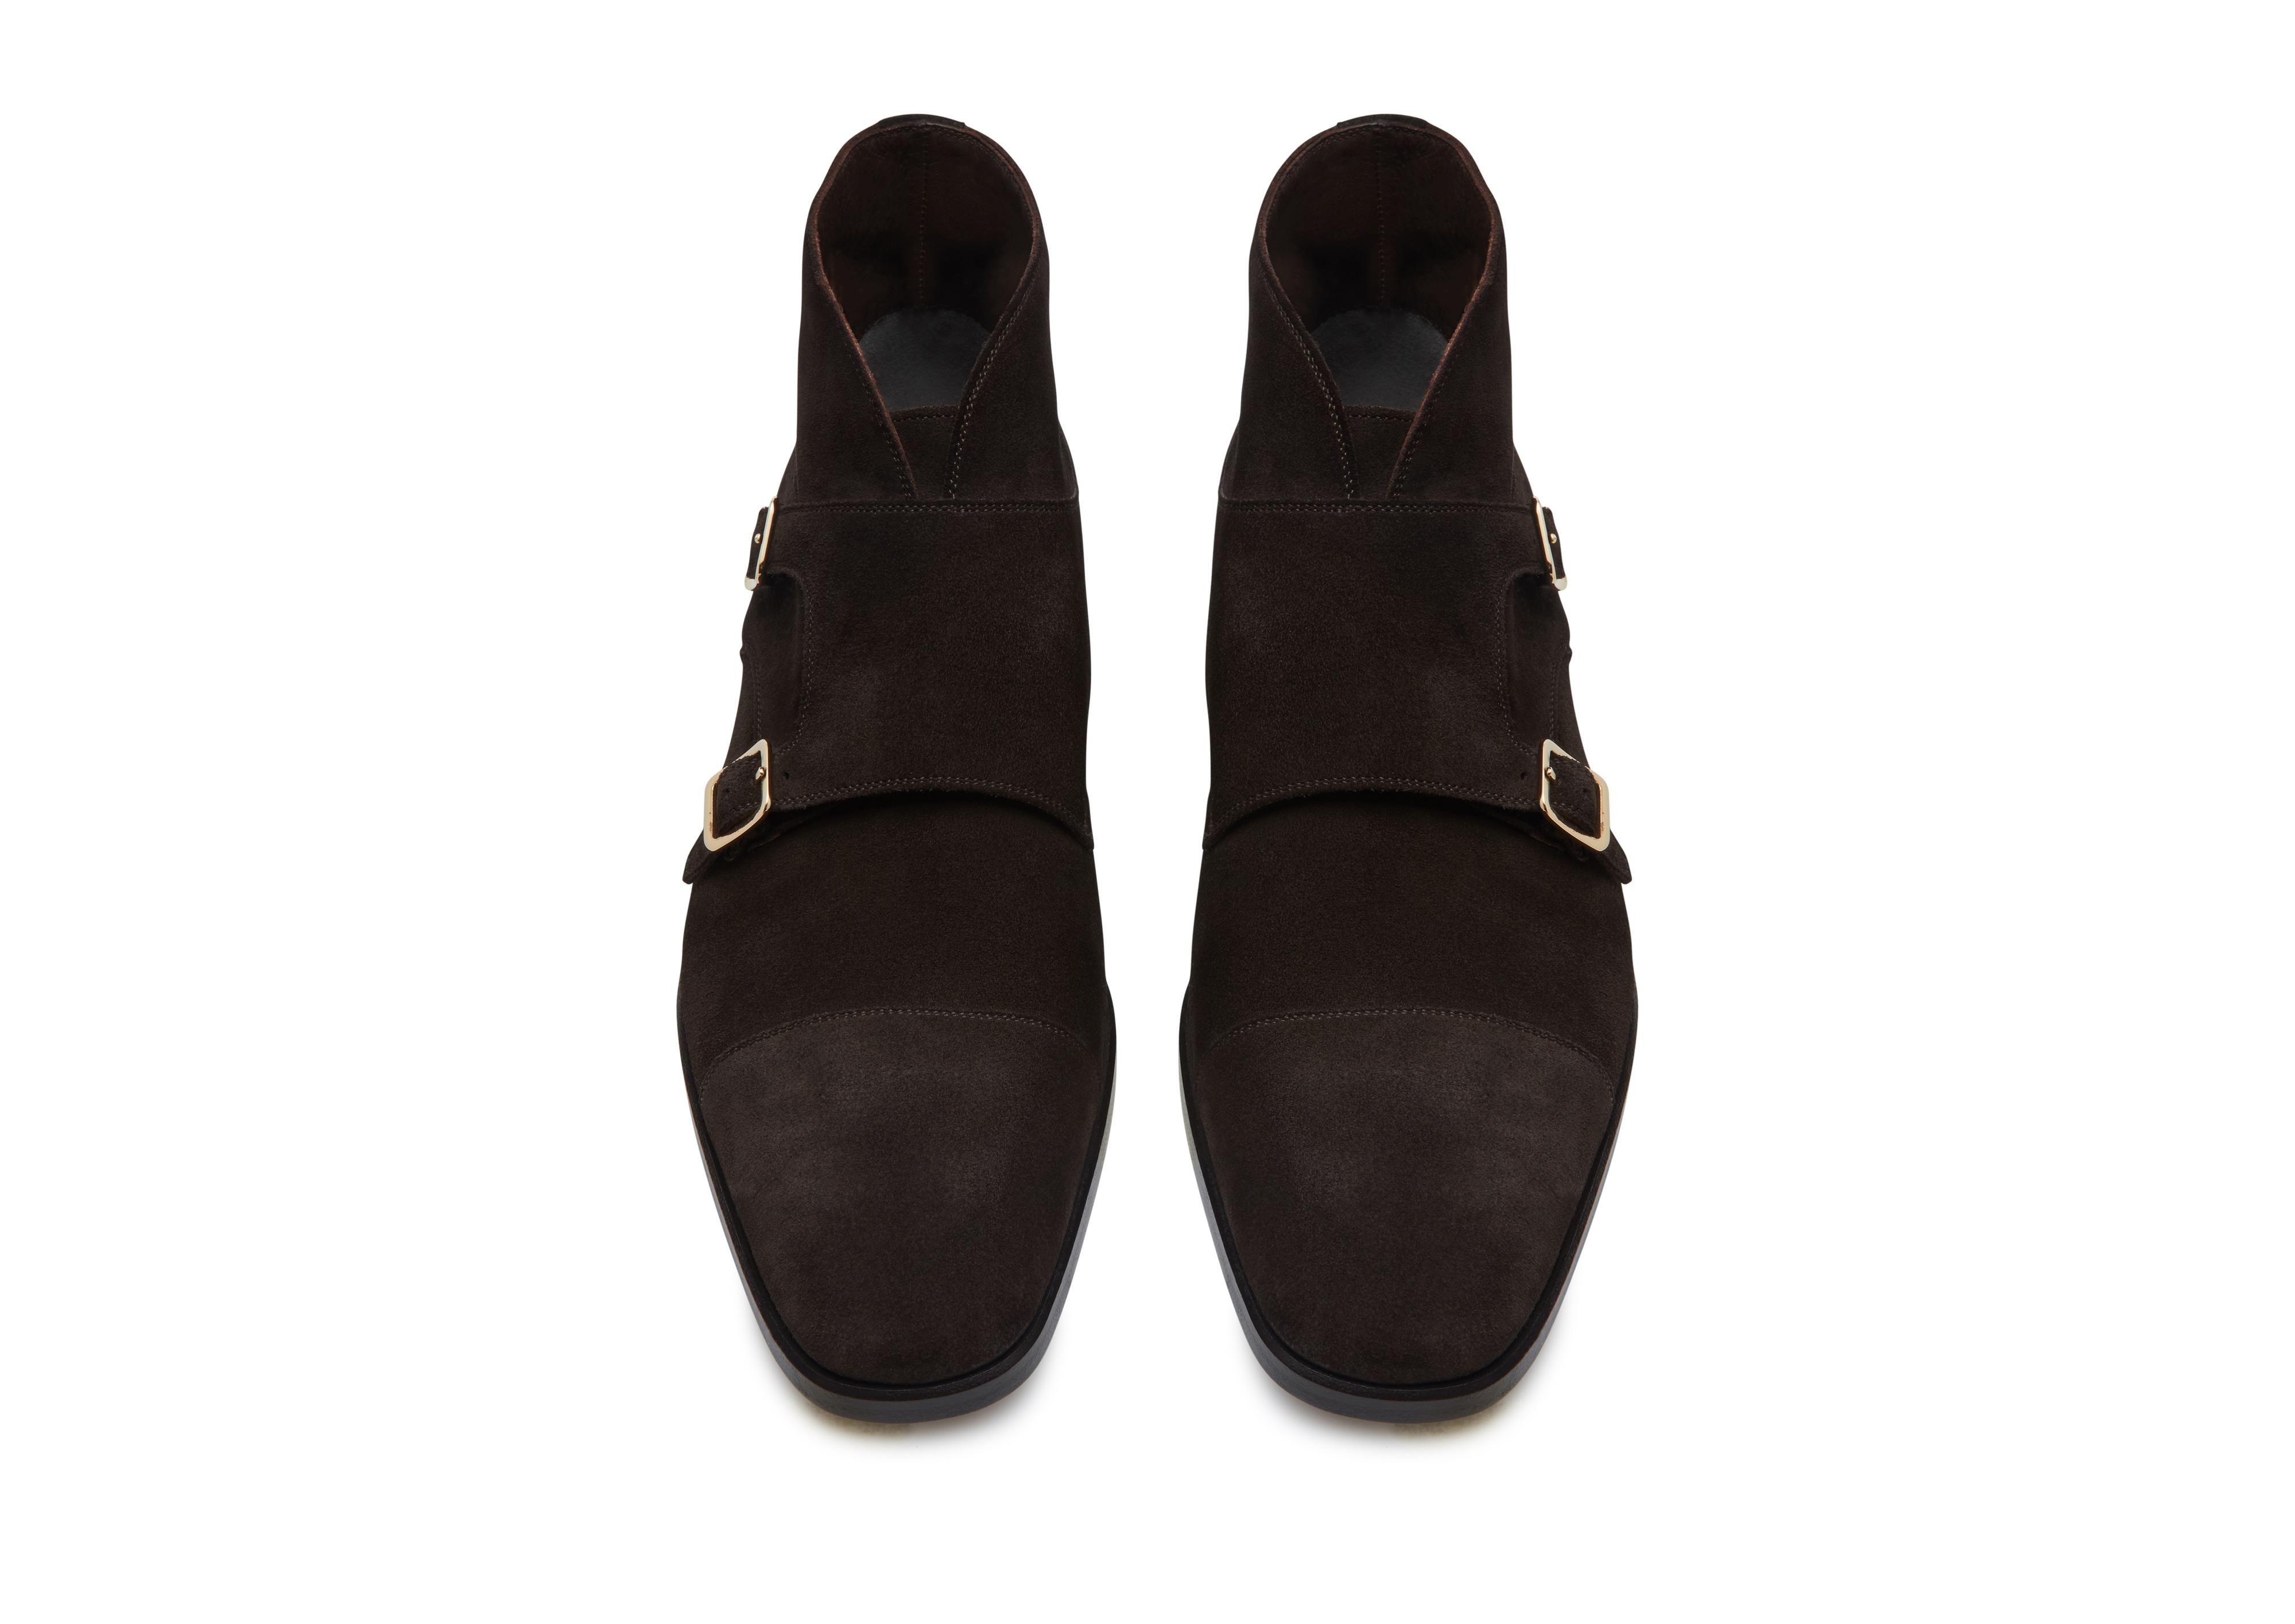 Tom Ford SUEDE ELKAN DOUBLE MONK STRAP BOOT | TomFord.com